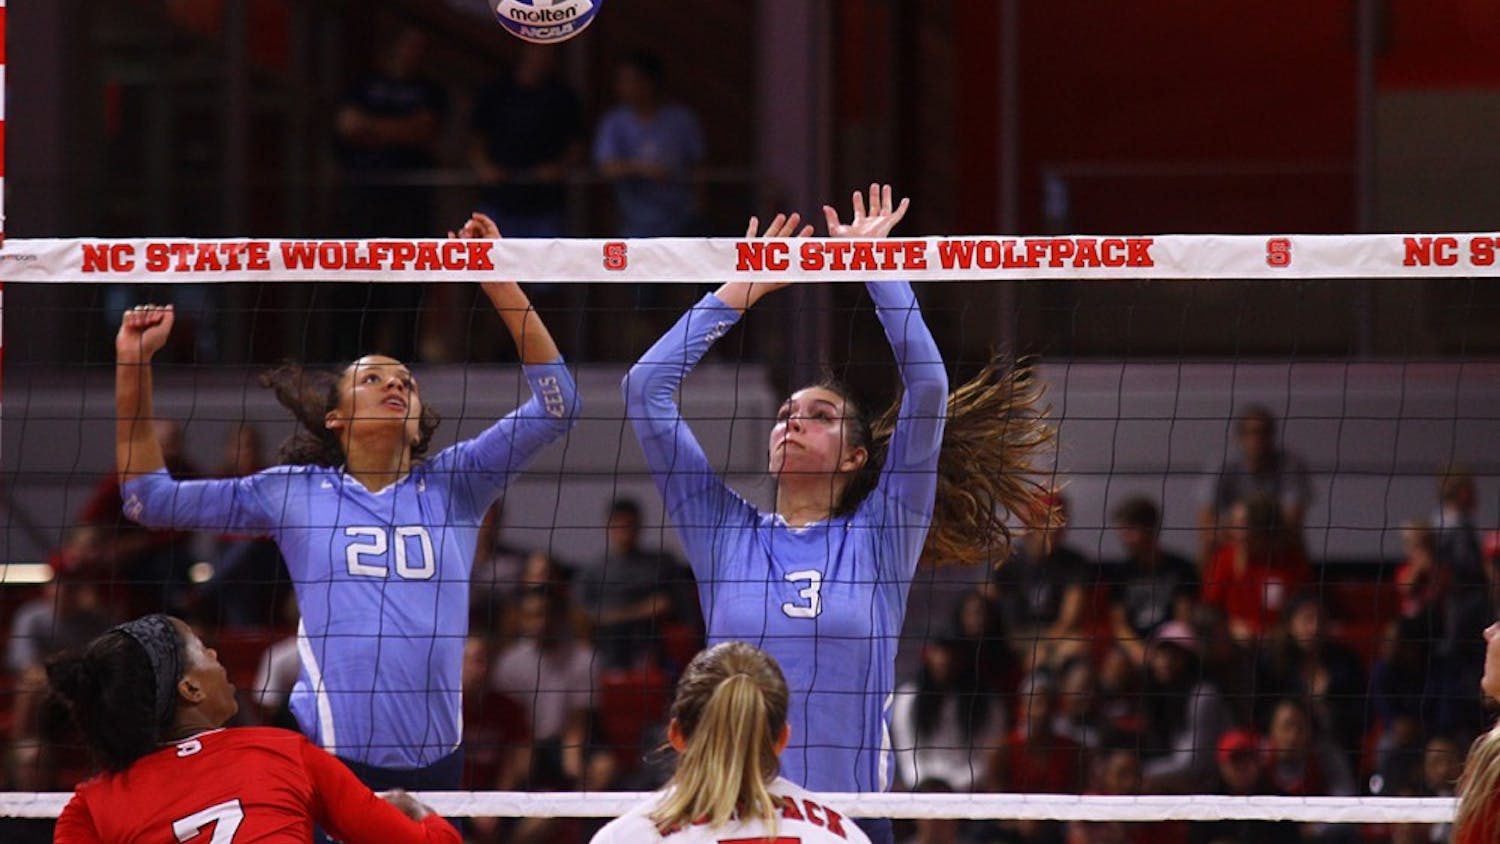 Taylor Treacy (20) and Beth Nordhorn (3) go up for the block against N.C. State.